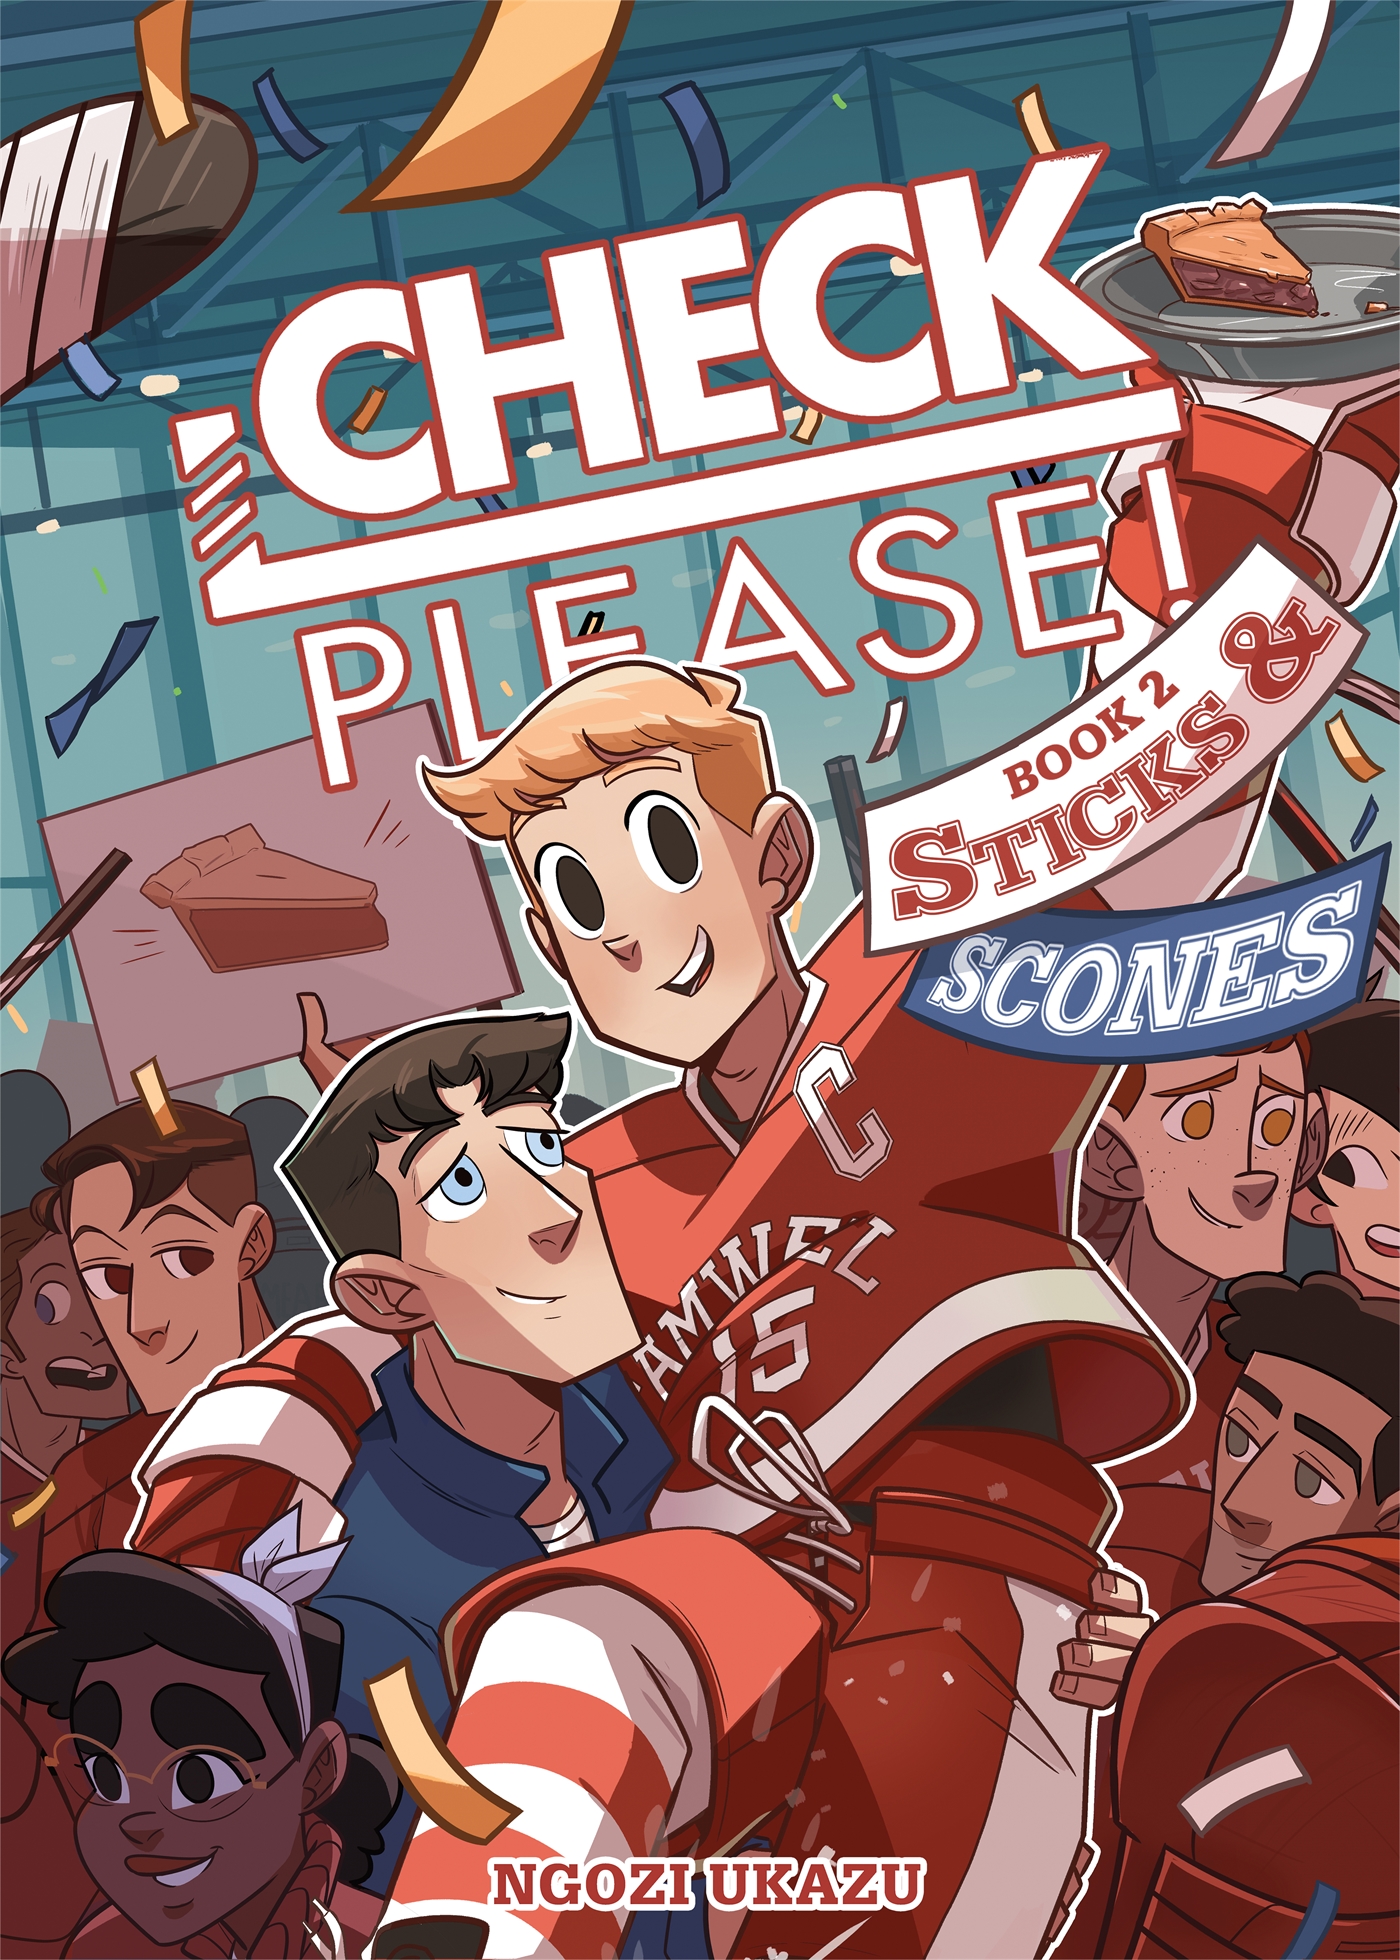 Images for Check, Please!: Sticks & Scones